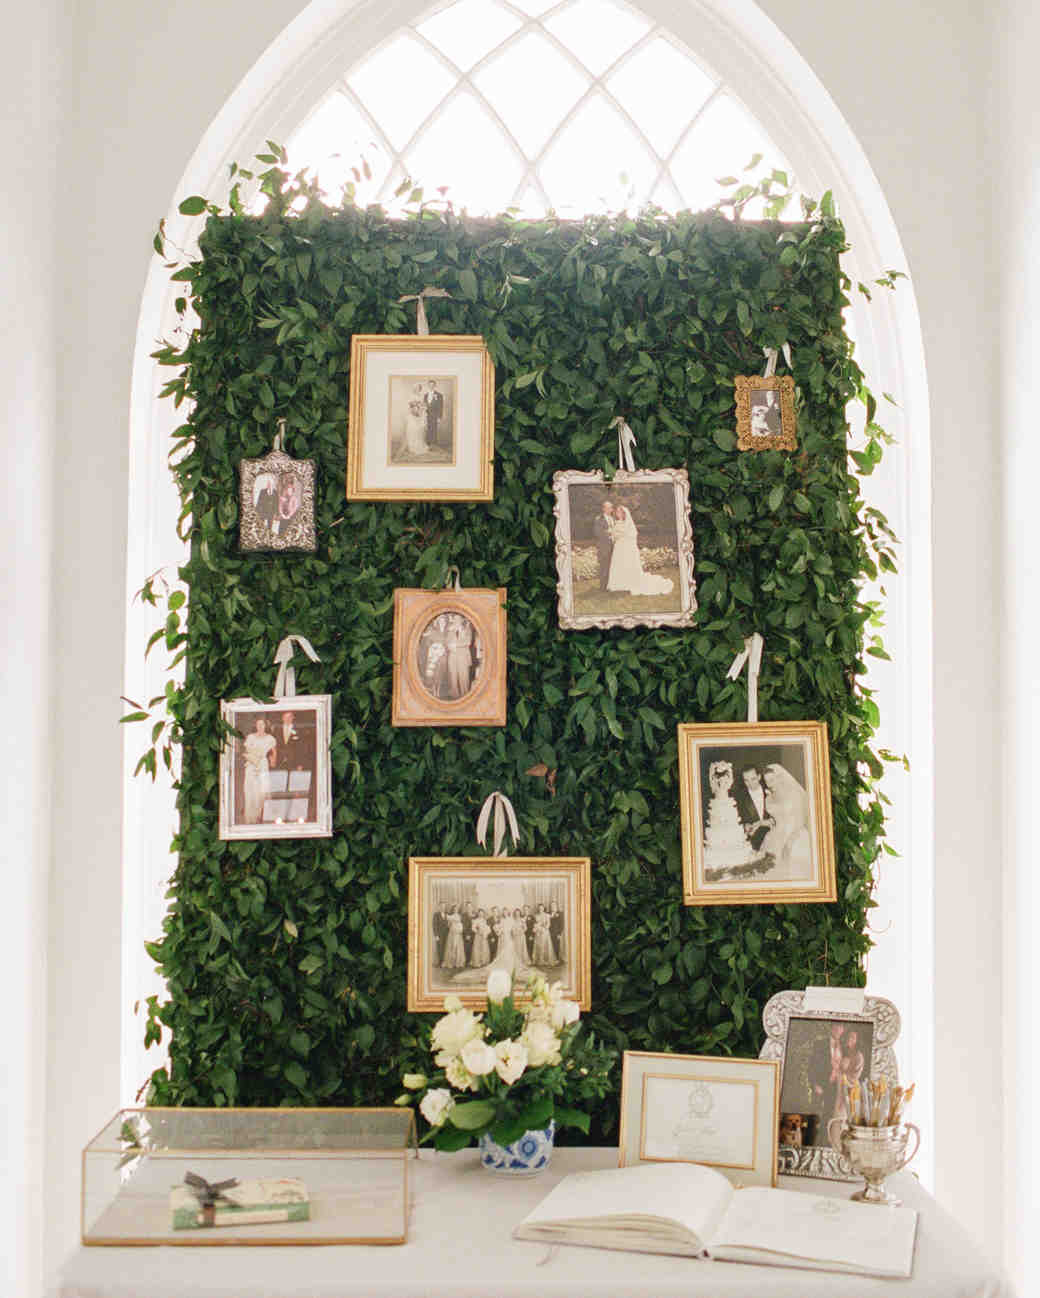 Top 100+ Images how to display wedding photos on wall Stunning